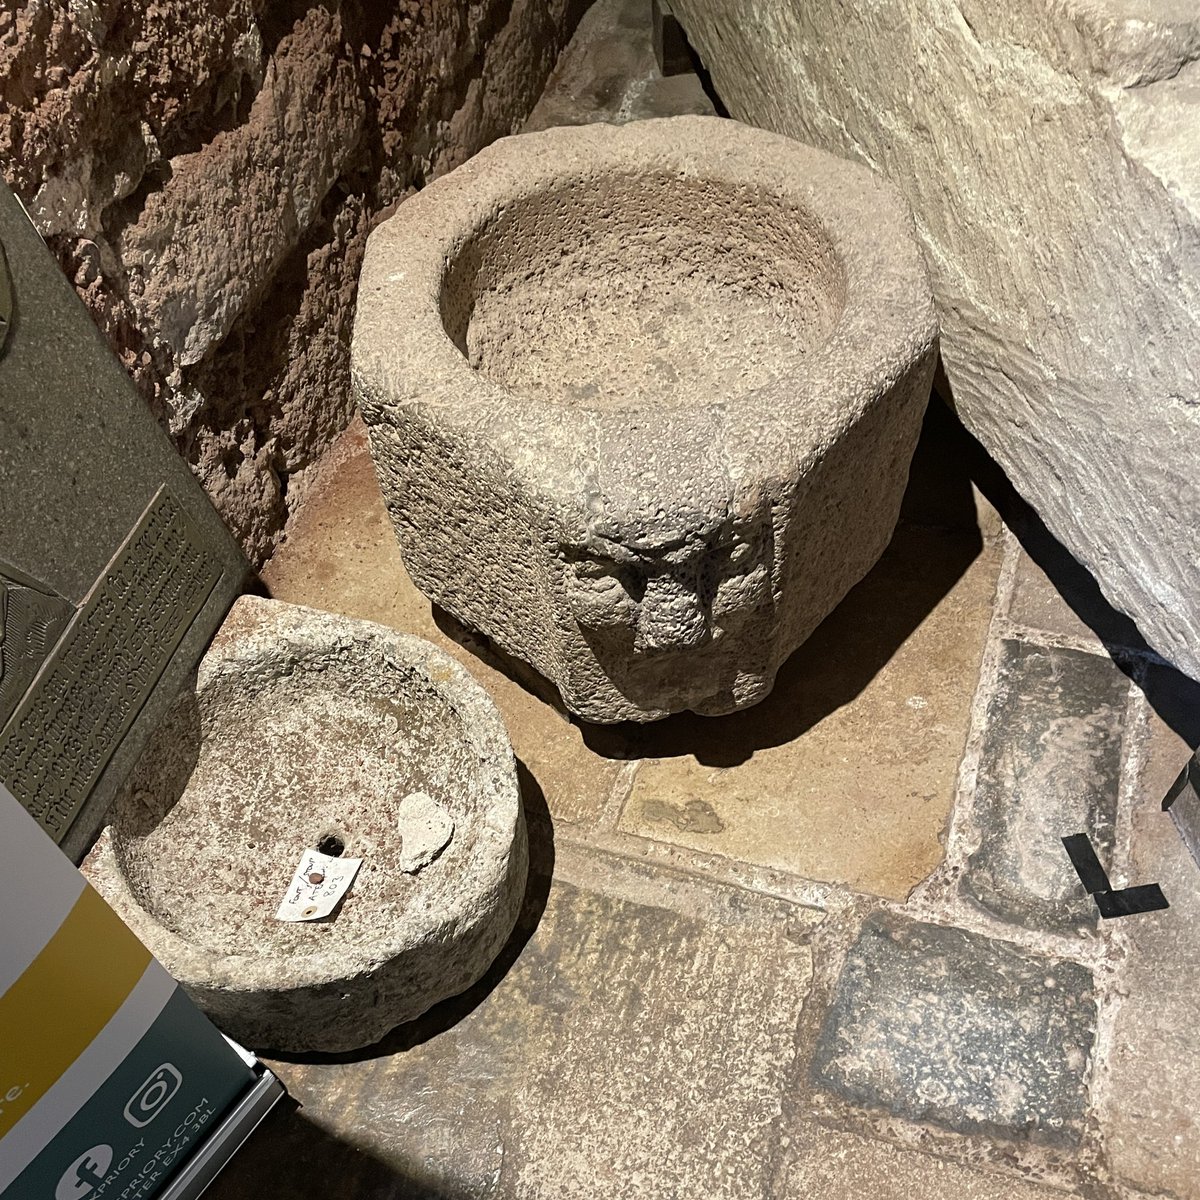 When is a font not a font? When it’s a stoup? (The label says font/stoup.) A collection of ancient stonework at St Nicholas Priory, Exeter. #fontsonfriday